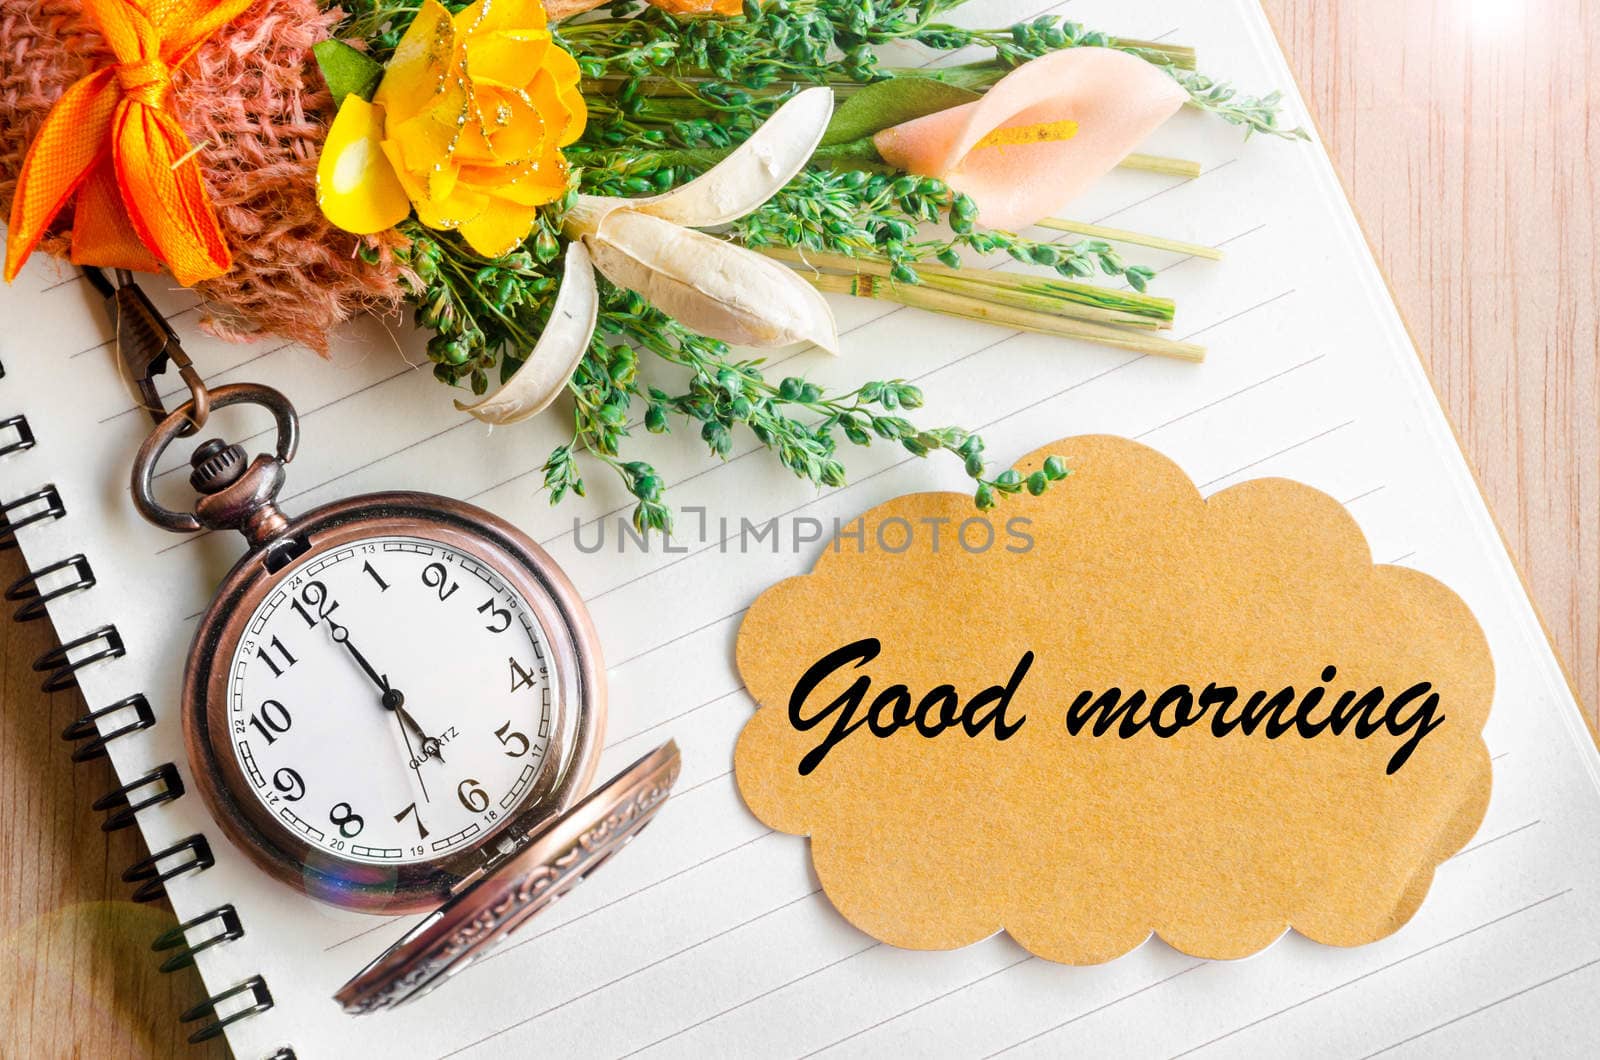 Good morning word. Blank brown tag and pocket watch on diary with flower.